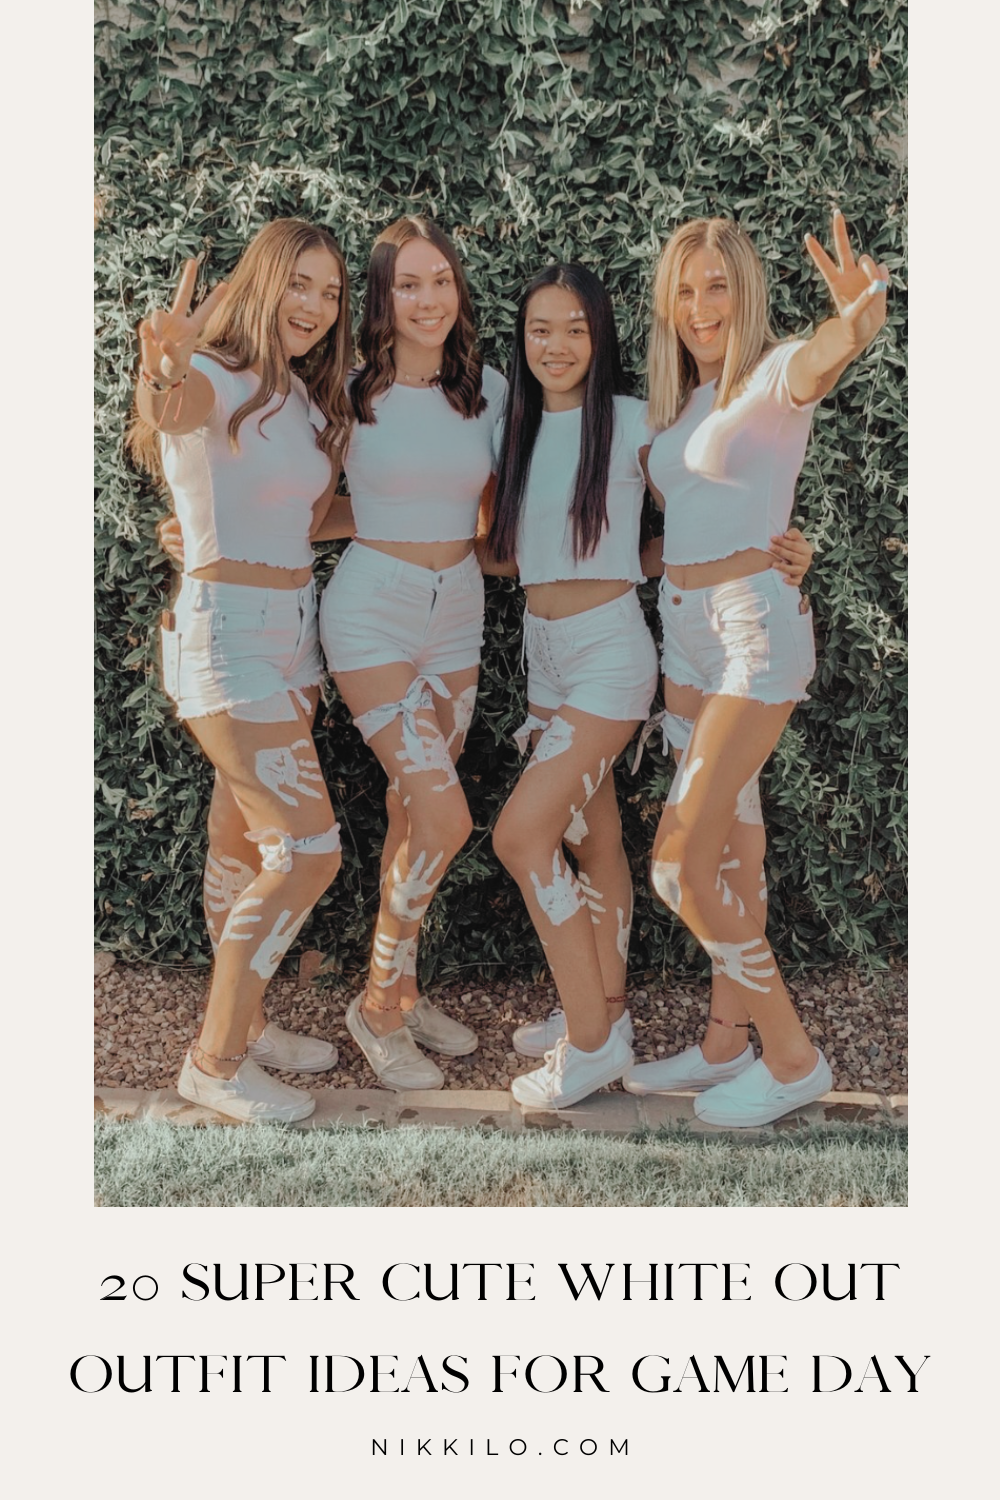 20 ADORABLE White Out Outfits For Game Day! — Nikki Lo